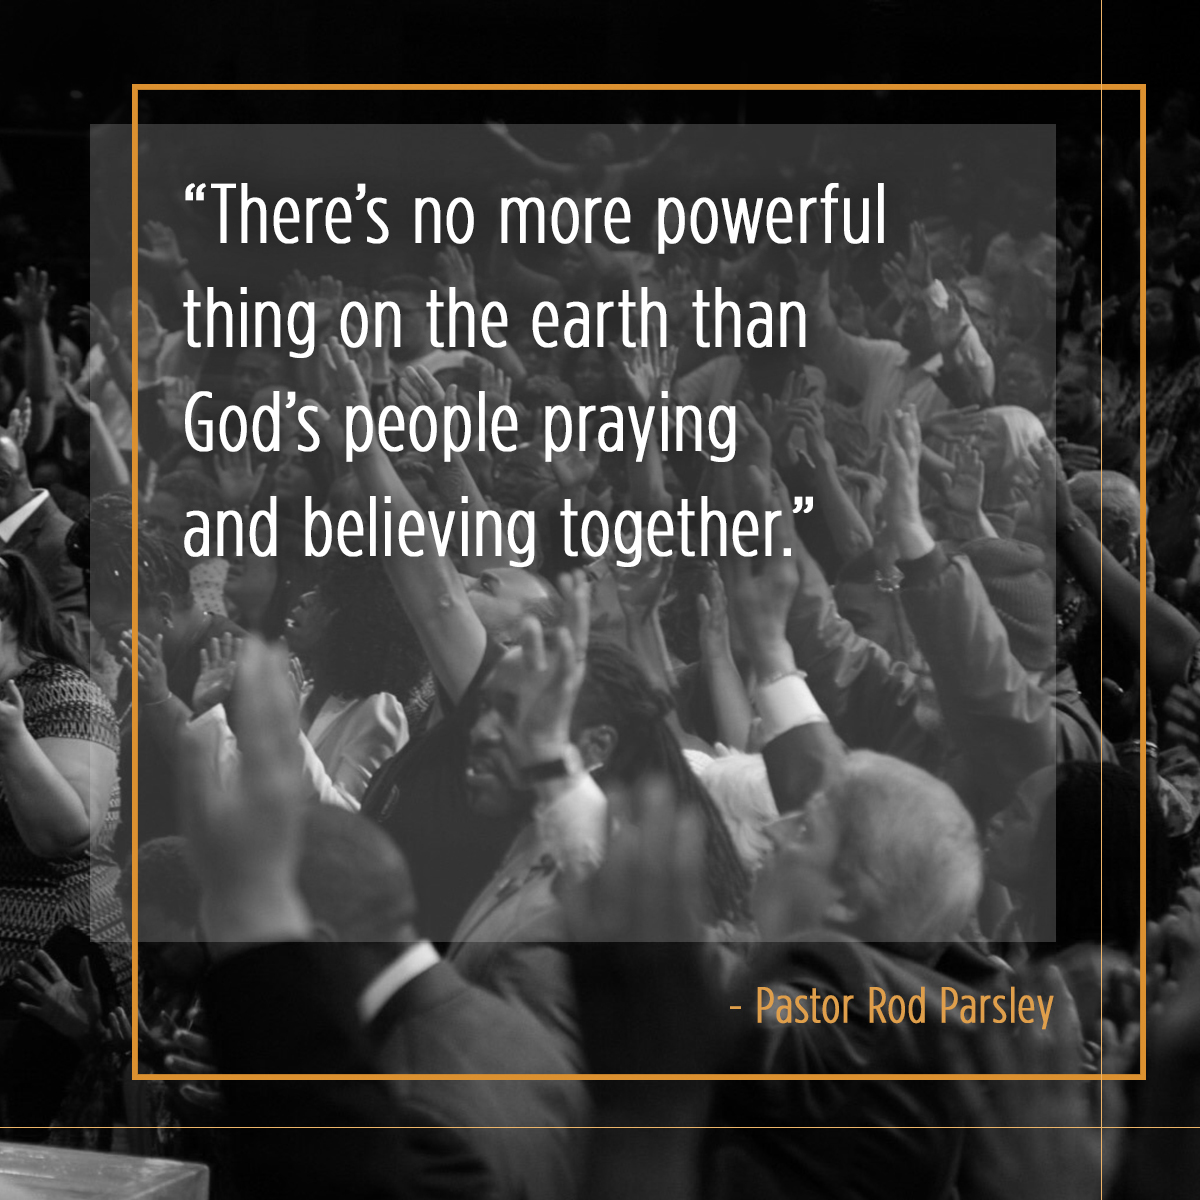 “There’s no more powerful thing on the earth than God’s people praying and believing together.” – Pastor Rod Parsley